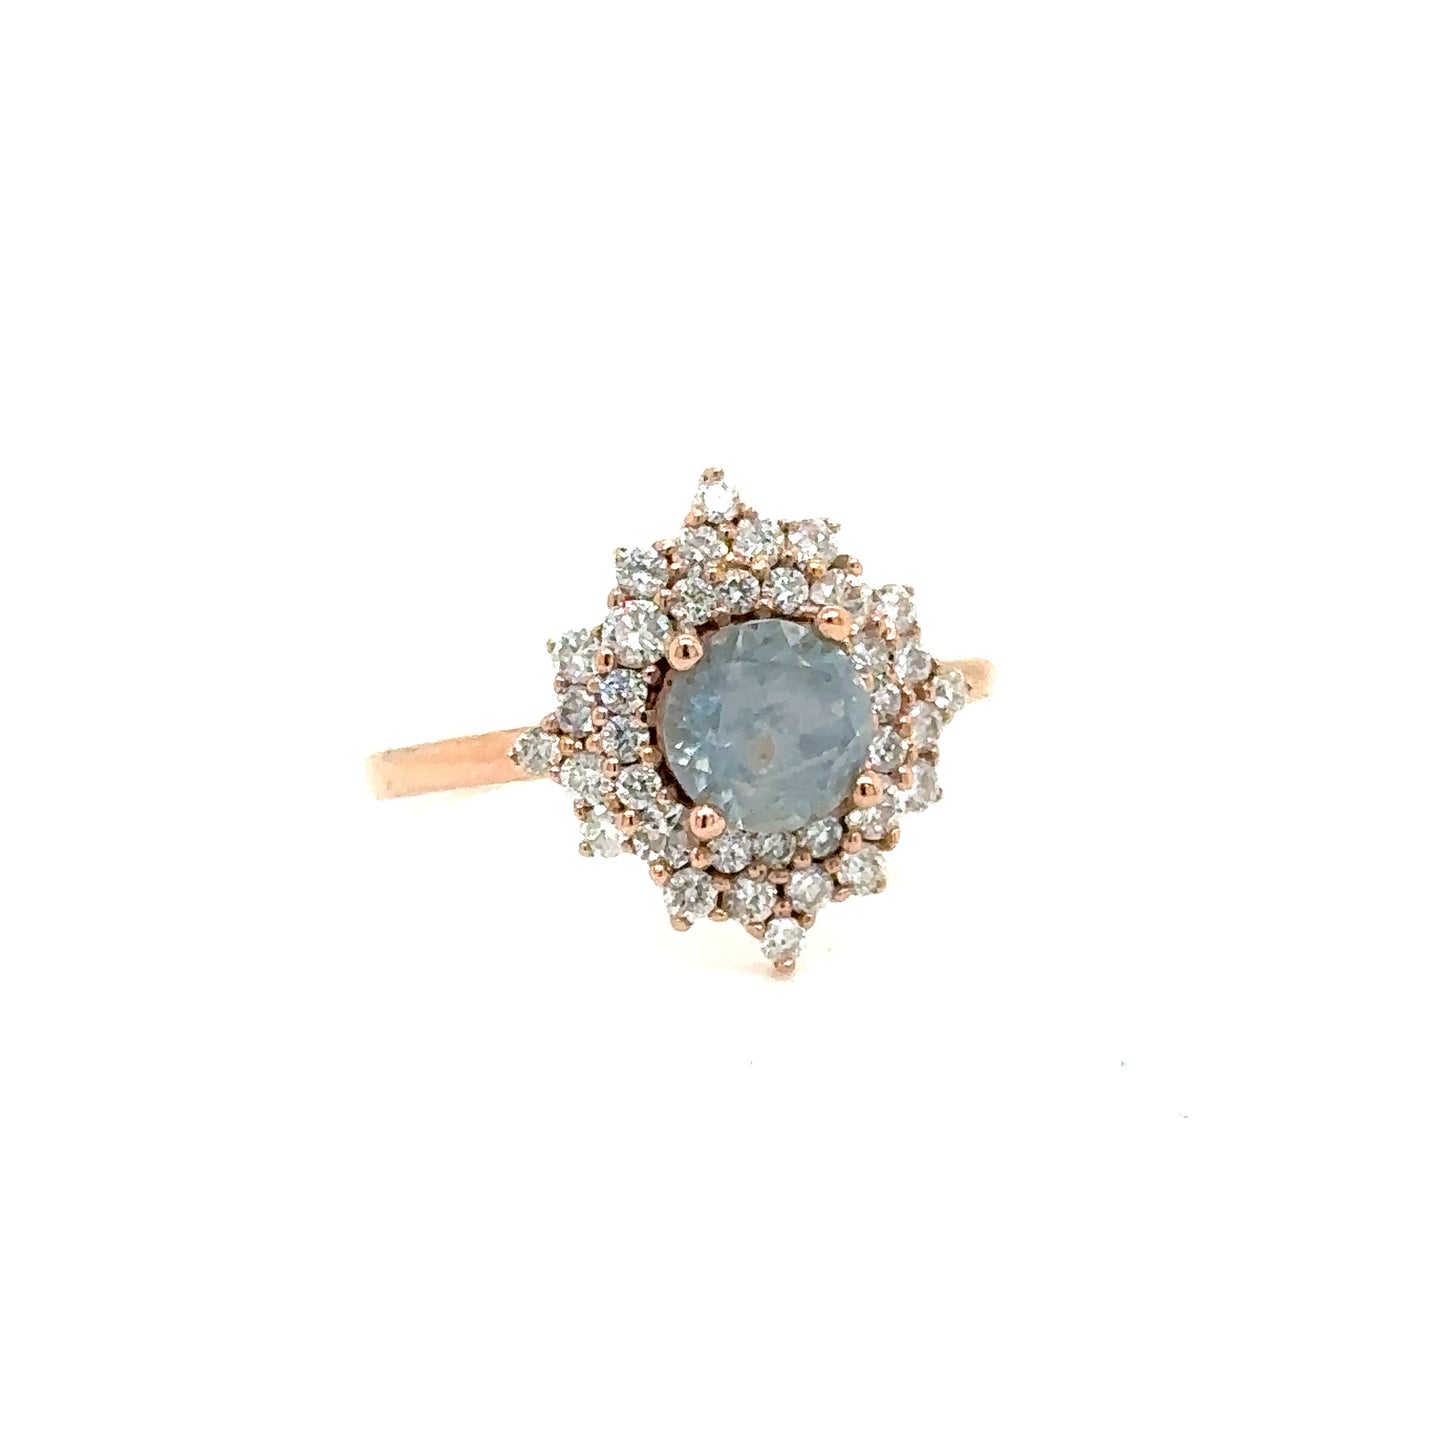 Opalescent 'Icy' Sapphire Ring with Diamonds